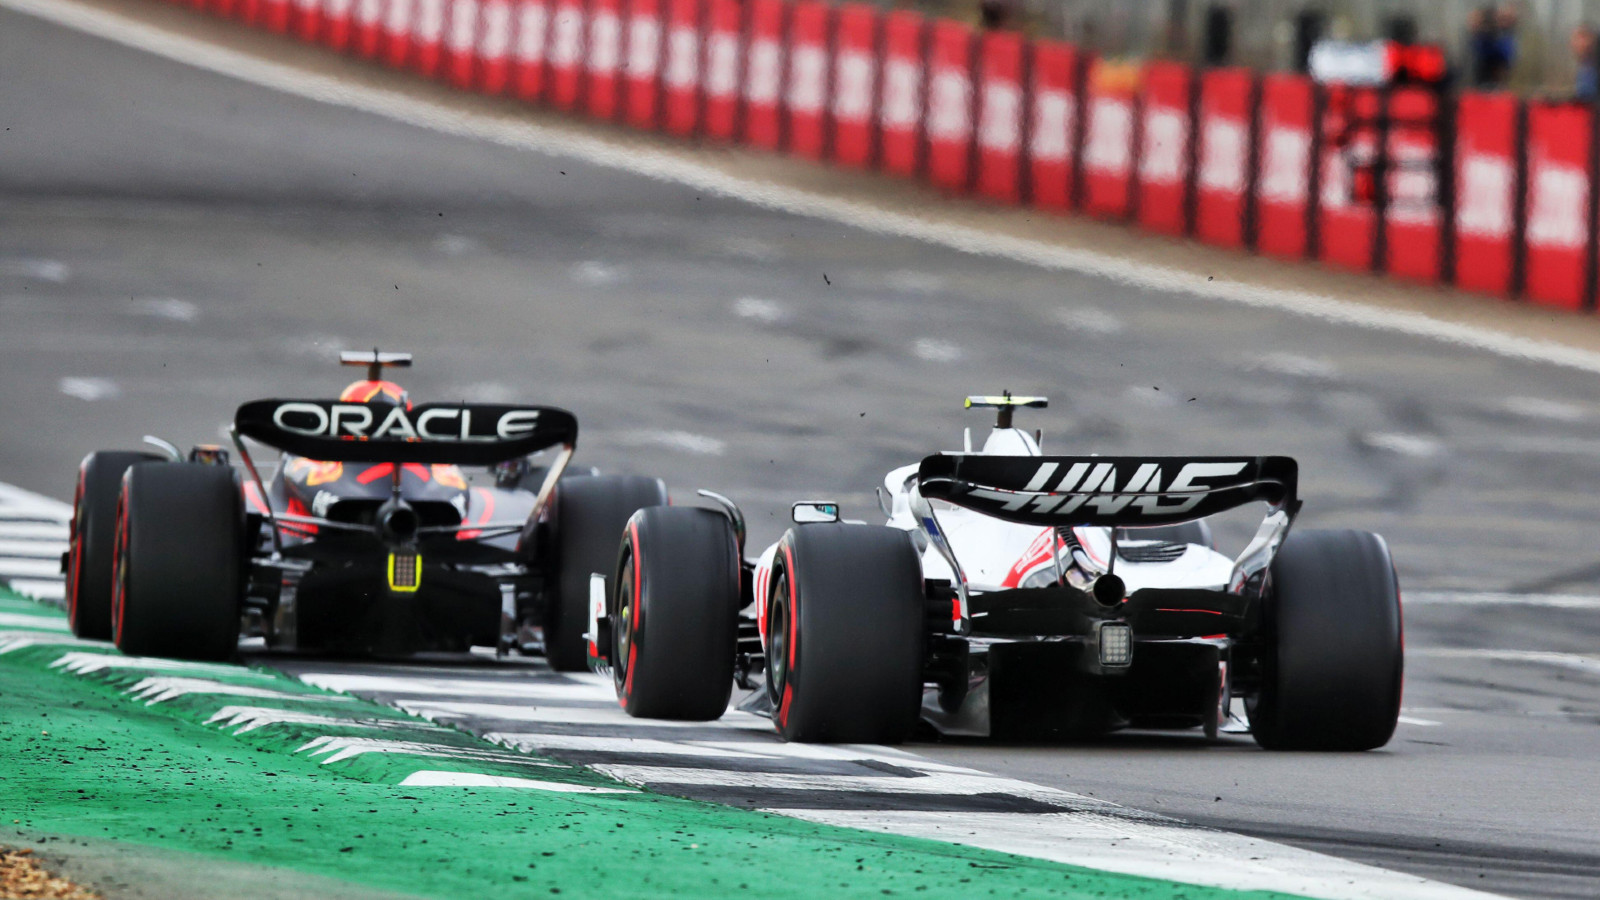 Haas' Mick Schumacher chasing Red Bull's Max Verstappen at the British Grand Prix. Silverstone, July 2022.